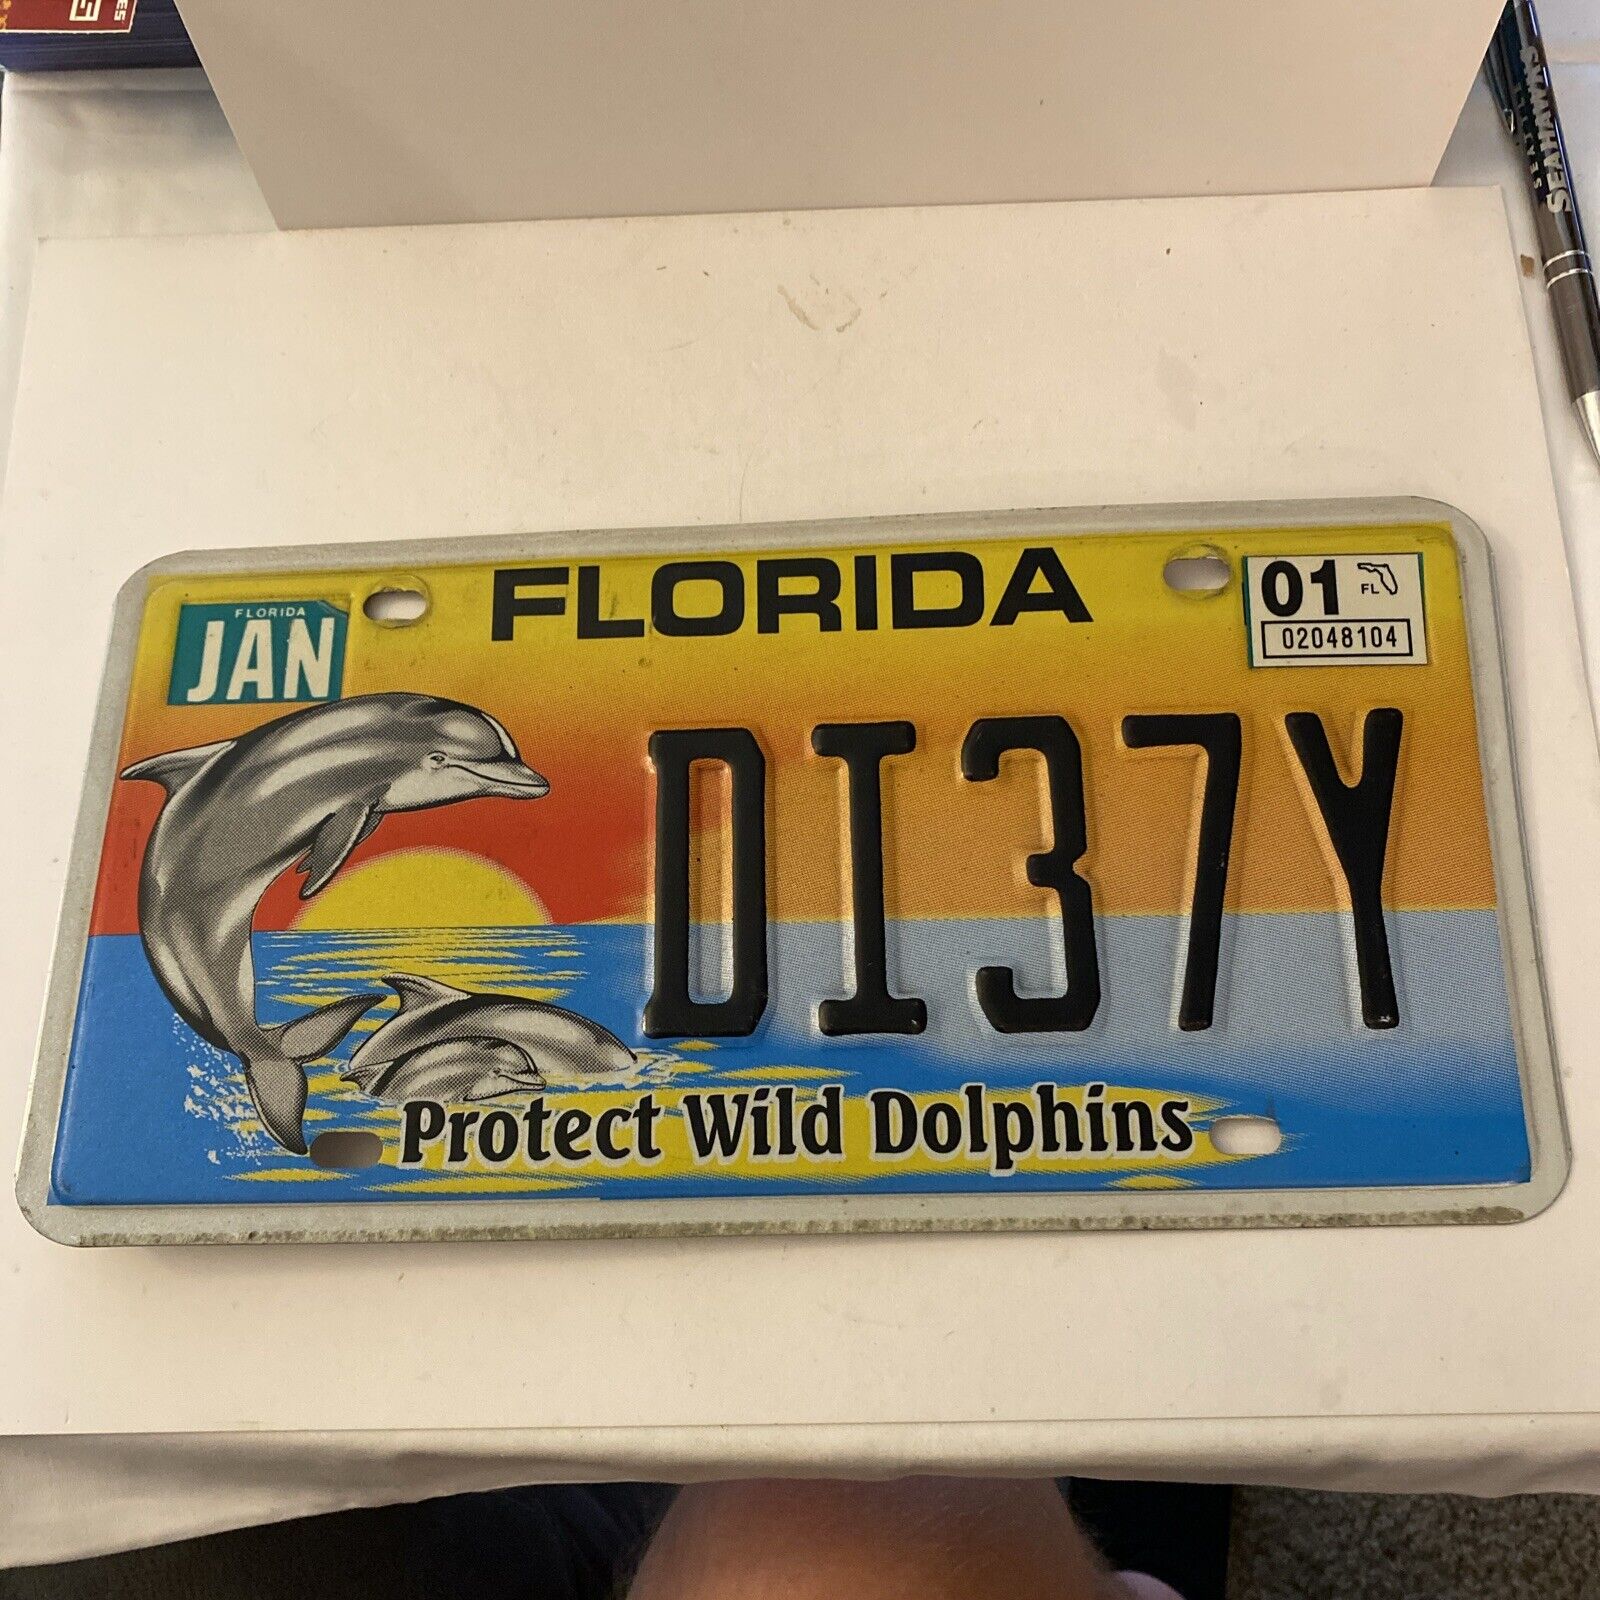 FLORIDA PROTECT WILD DOLPHINS LICENSE PLATE exp.2001